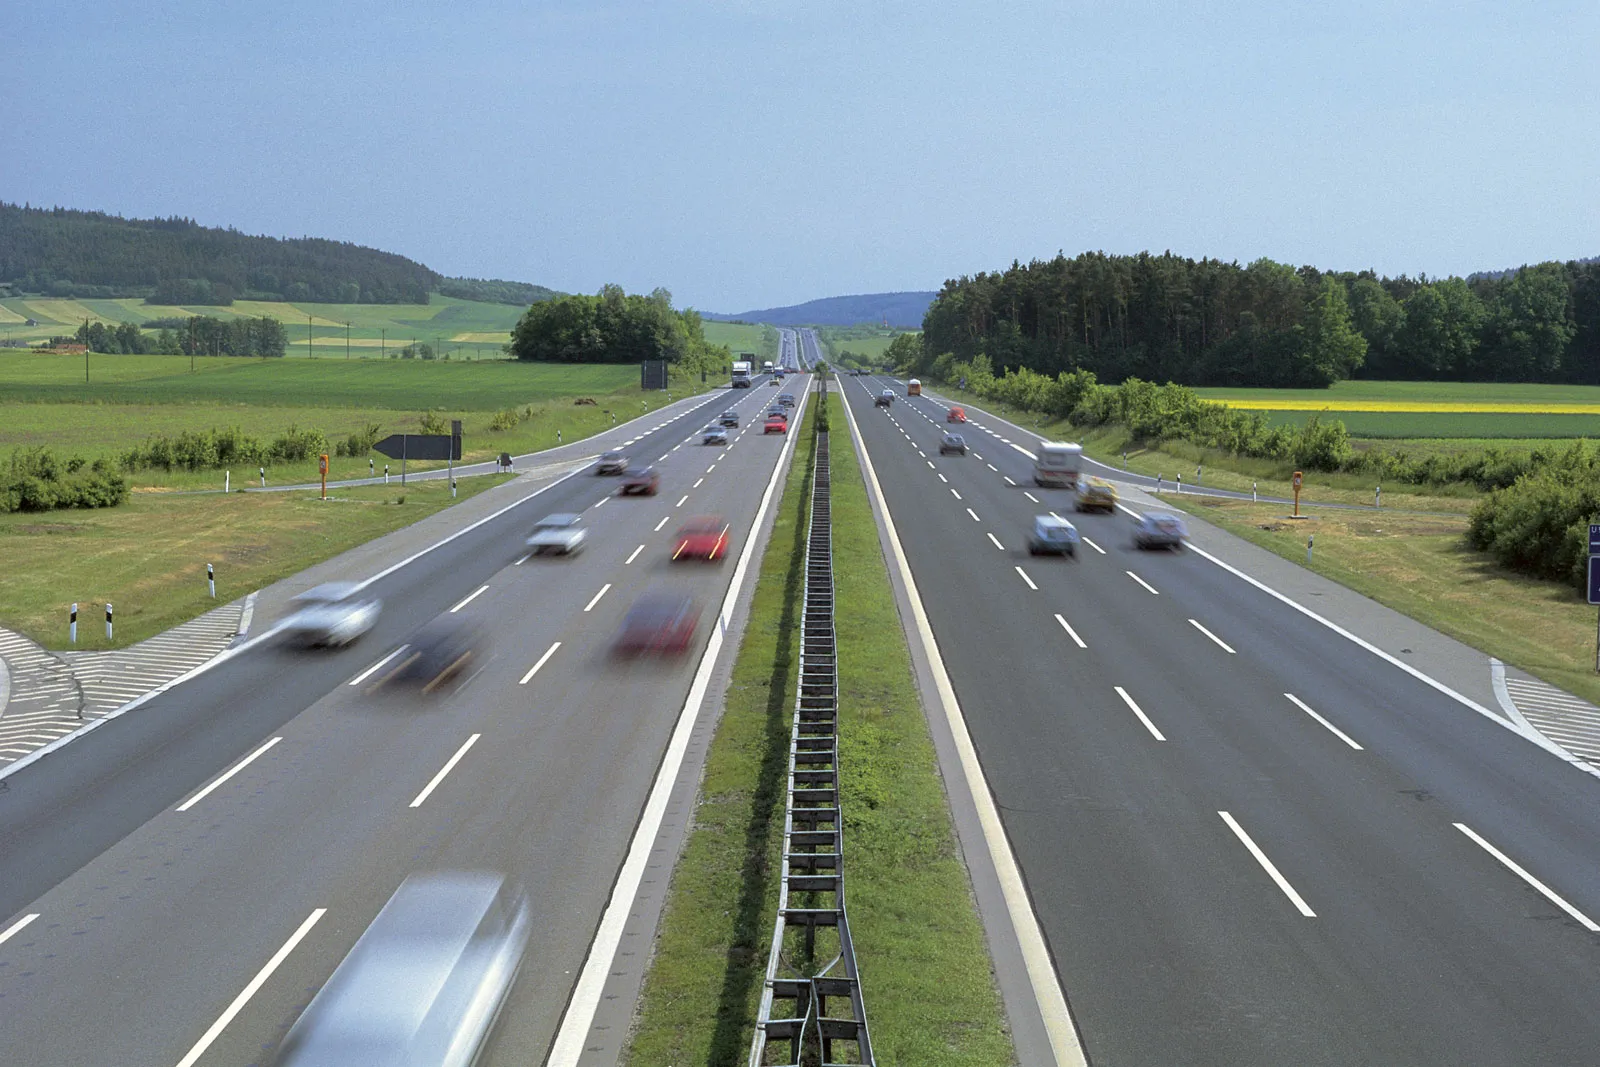 The economic and social benefits of the autobahn system in Germany